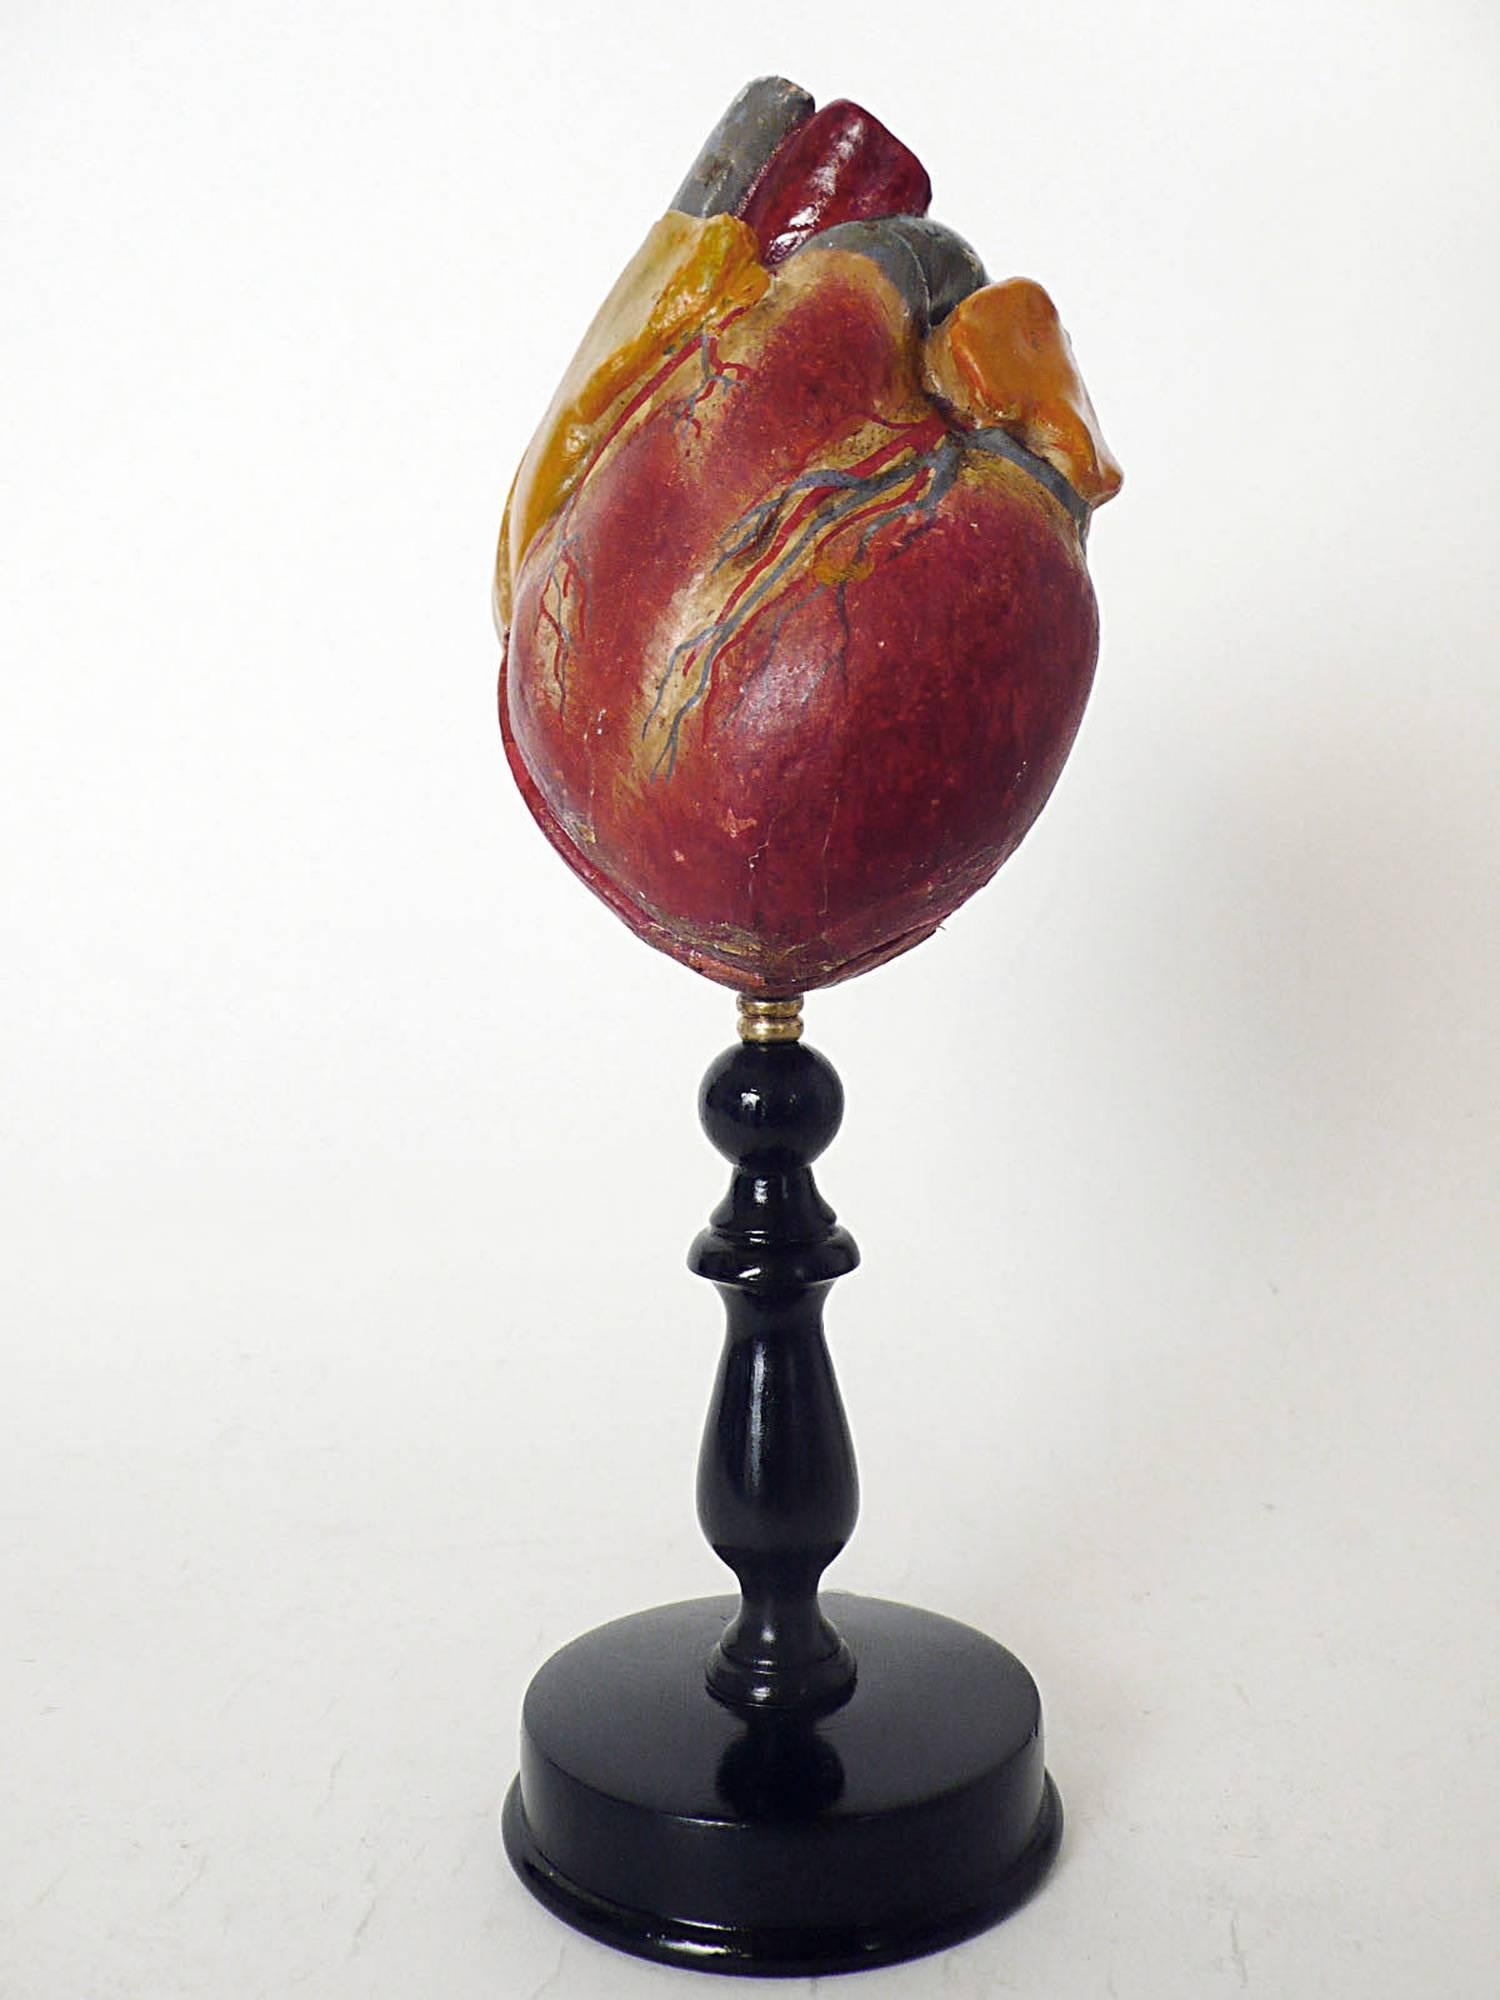 Rare anatomic model for class, depicting a man’s heart, made out of painted papier mâché and mounted over a black round wooden base.